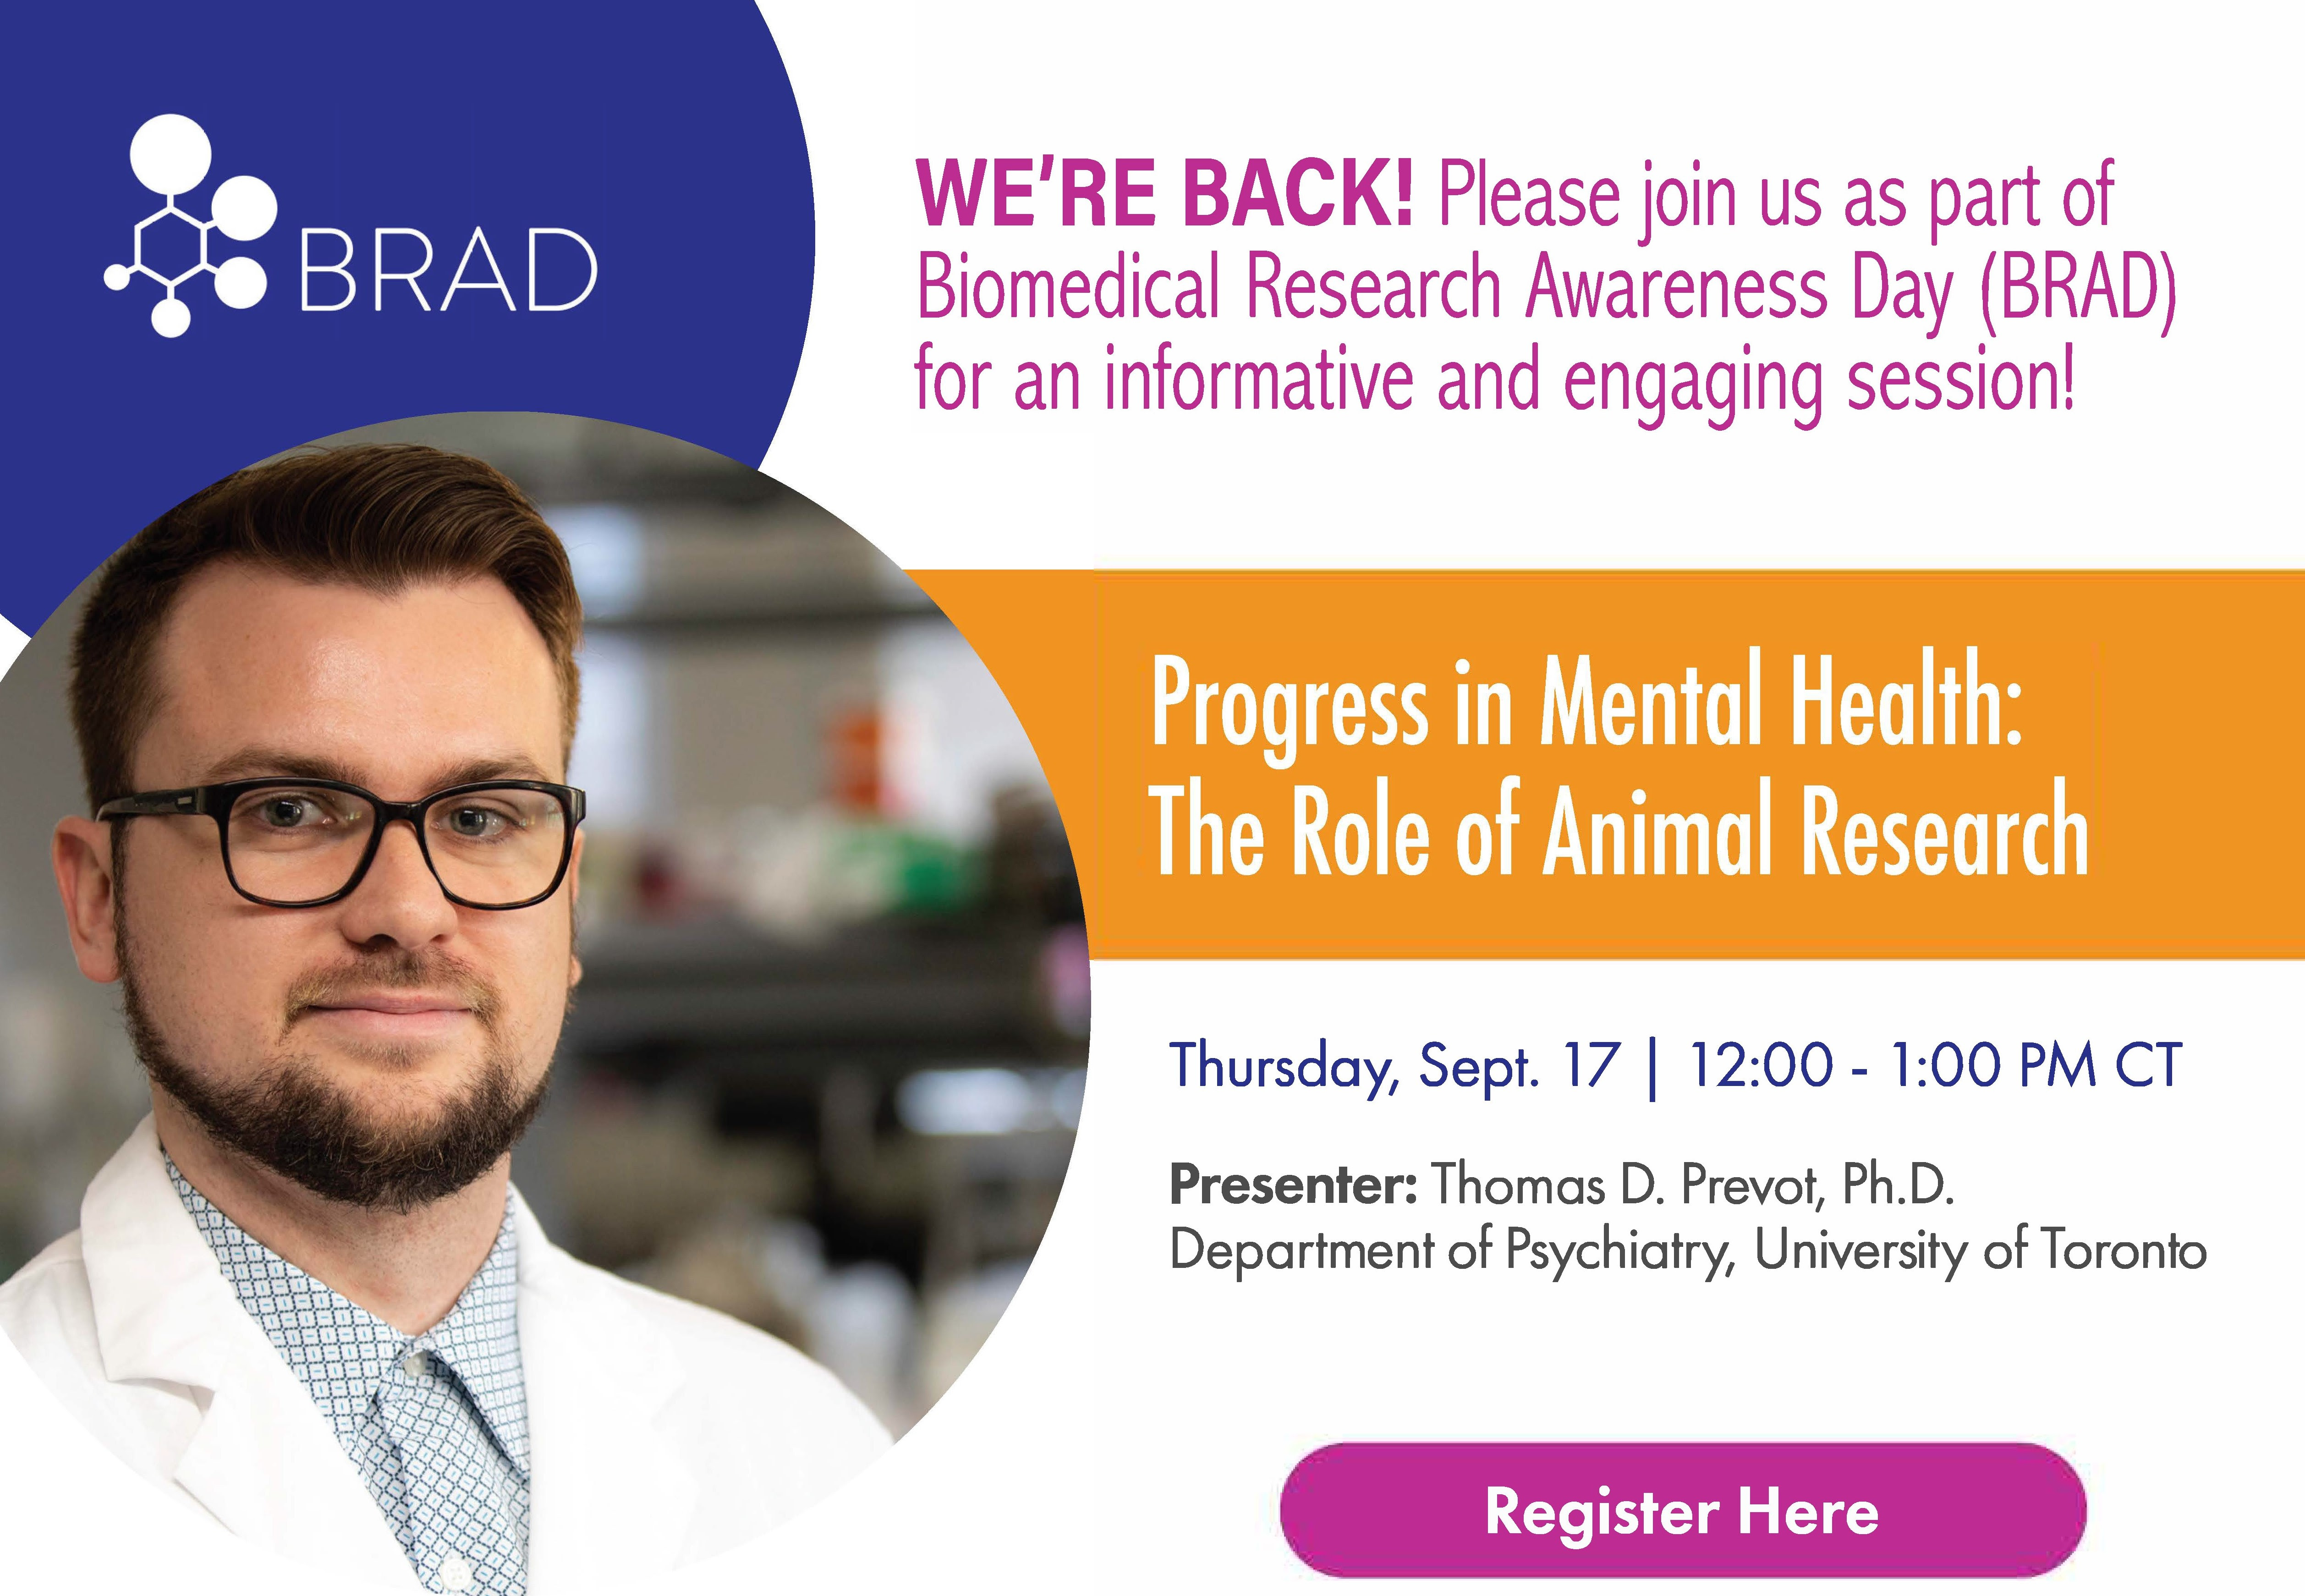 Click here to Register! Please join us as a part of Biomedical Research Awareness Day (BRAD) for an informative and engaging session! Progress in Mental Health: The Role of Animal Research. Thursday, Sept. 17. 12:00-1:00 PM CT. Presenter: Thomas D. Prevot, Ph.D. Department of Psychiatry, University of Toronto